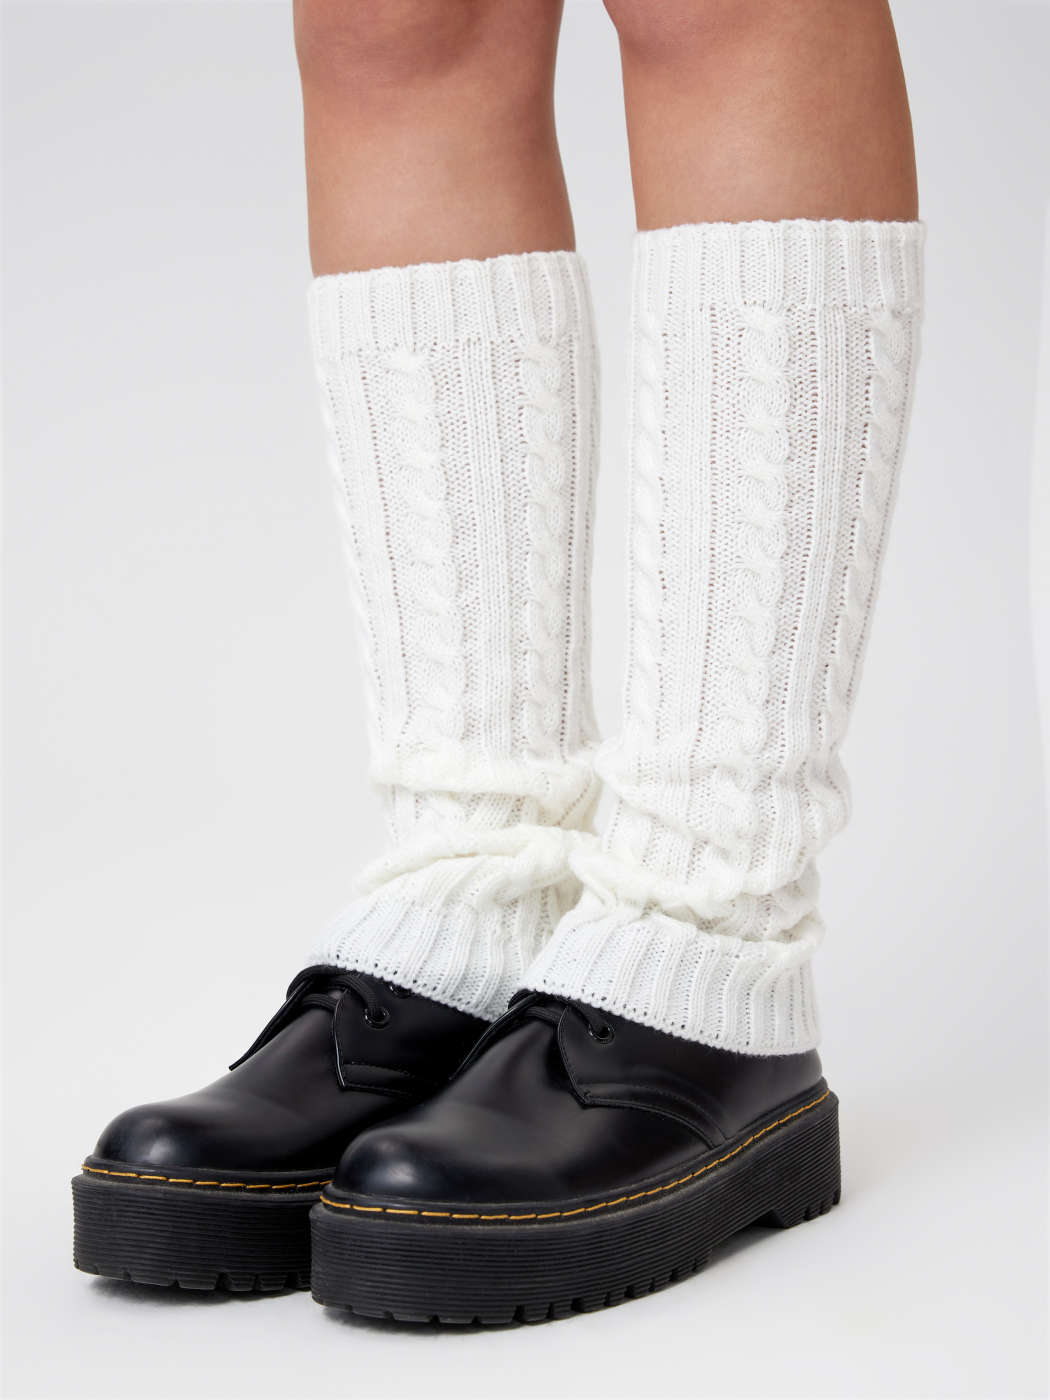 Cable Knit Leg Warmers - Cider